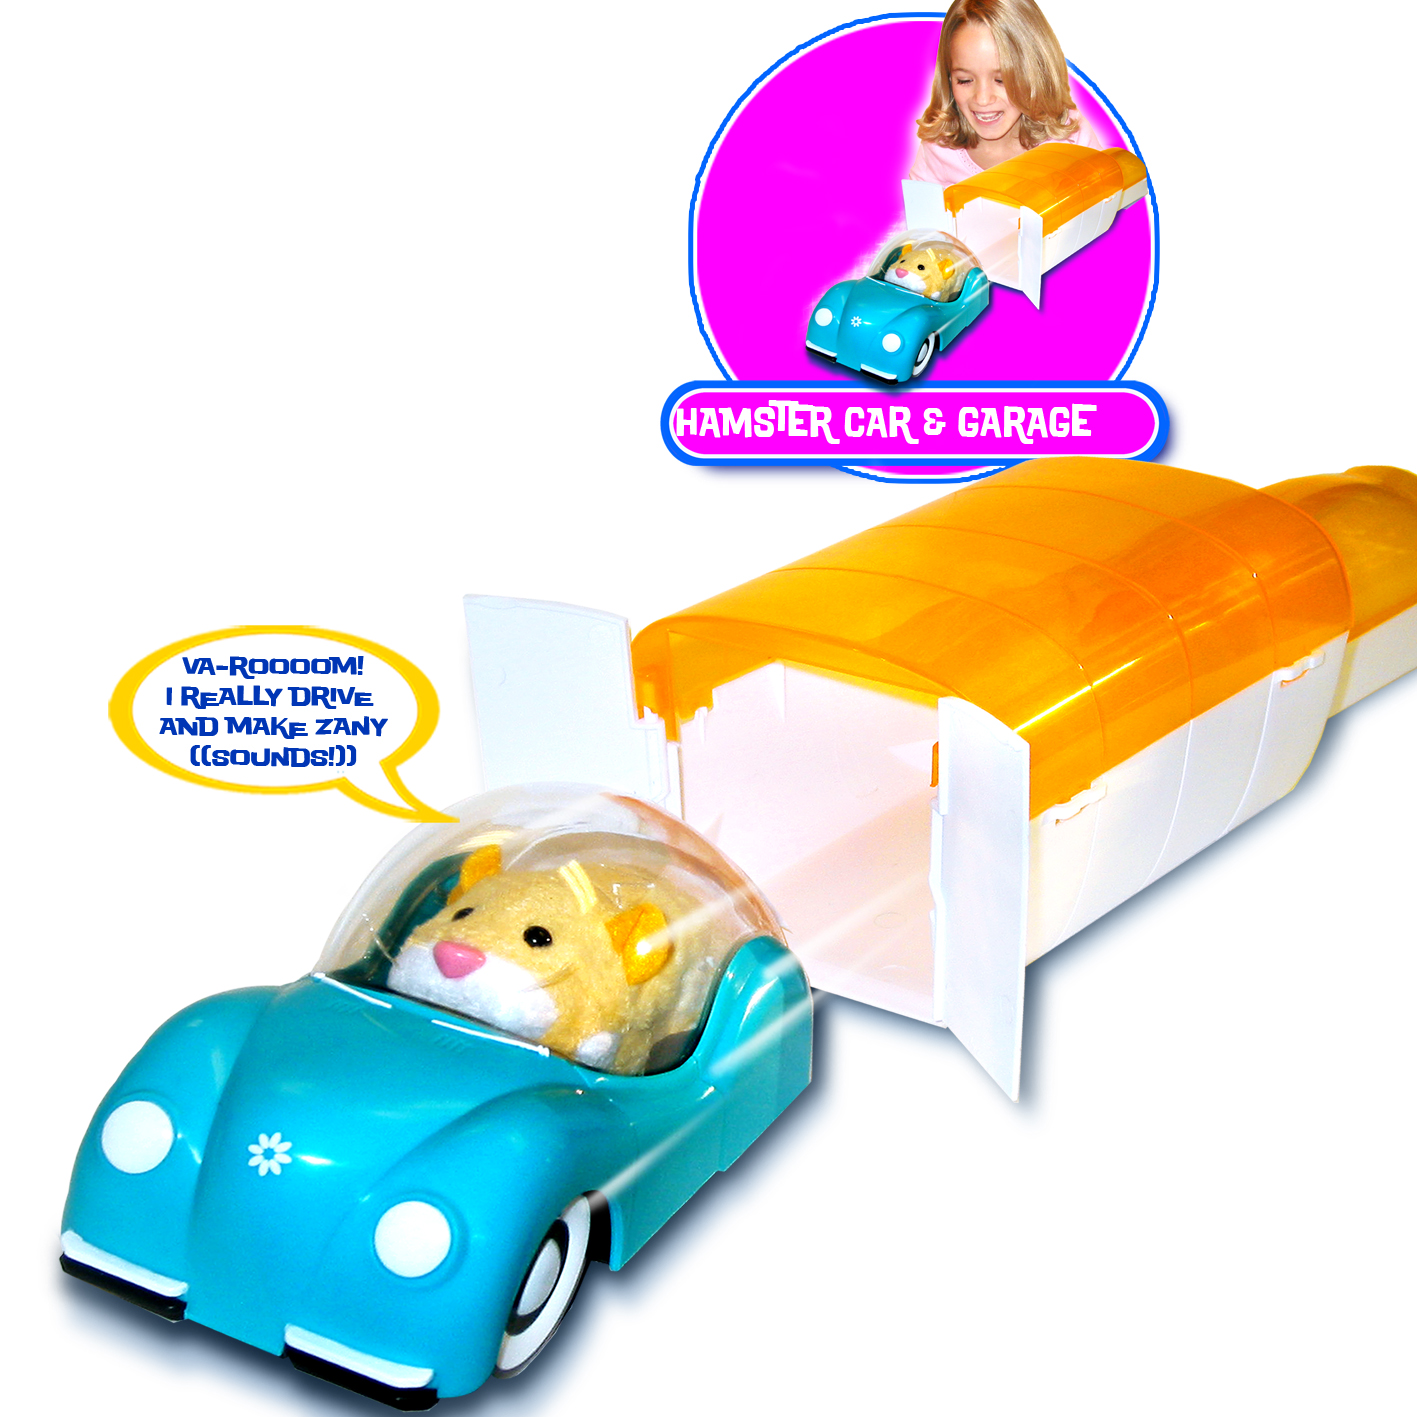 Unbranded Hamster Add-on Playset-hamster Car and Garage